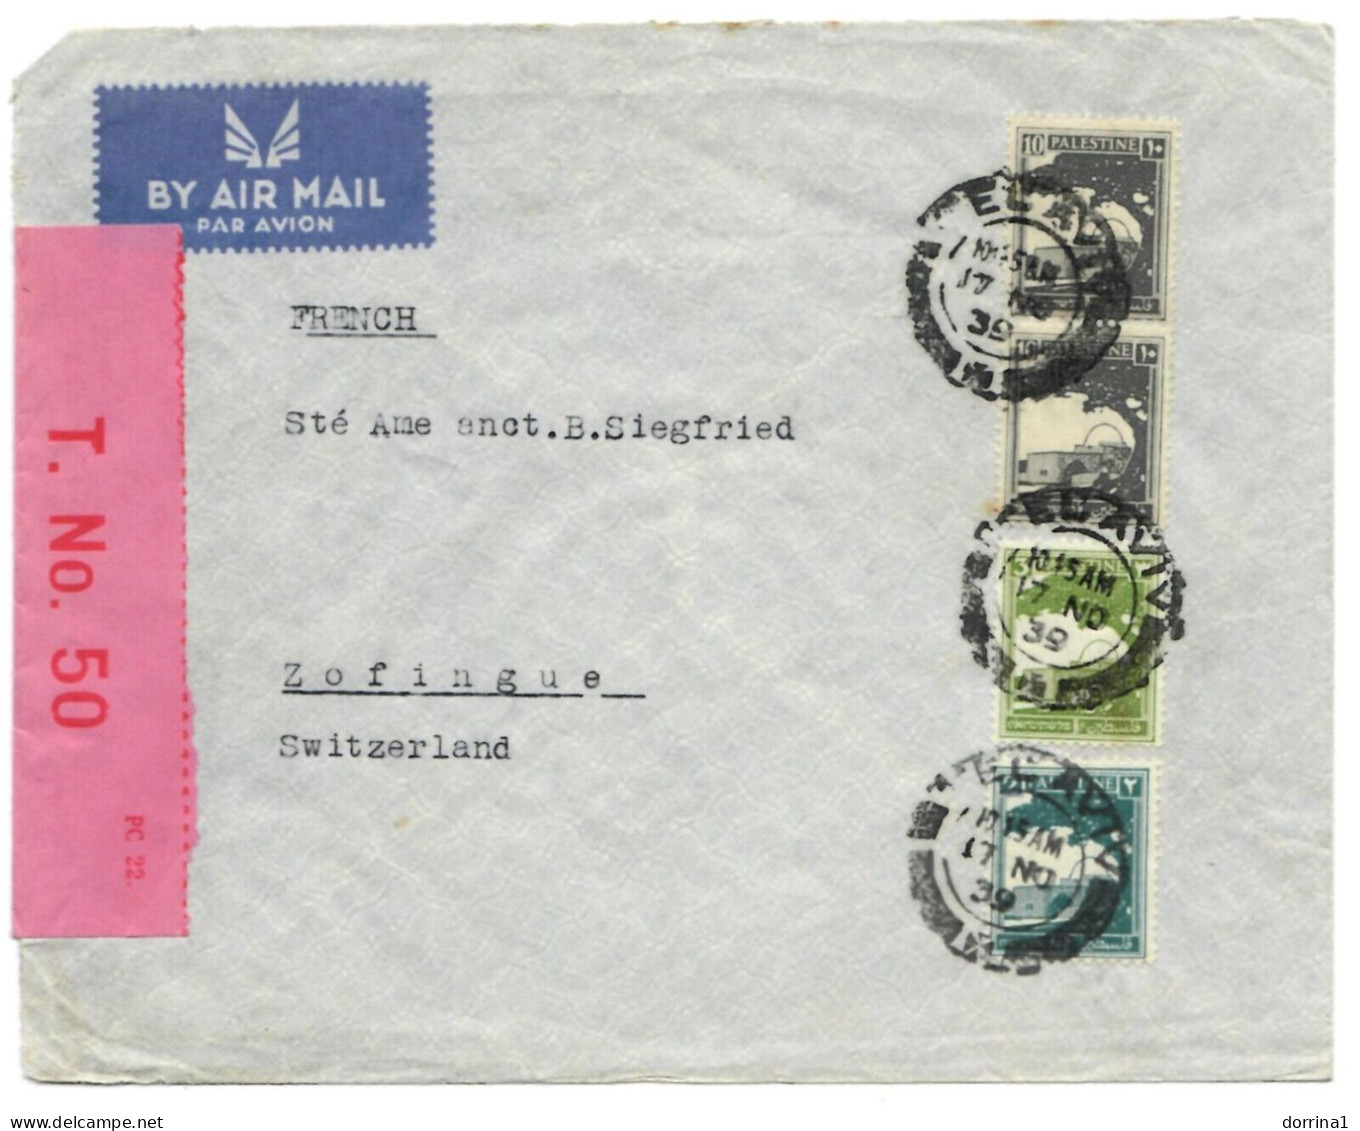 WWII 1939 Cover Tel Aviv Palestine Mandate Open By Censor T No 50 AirMail - Palestine